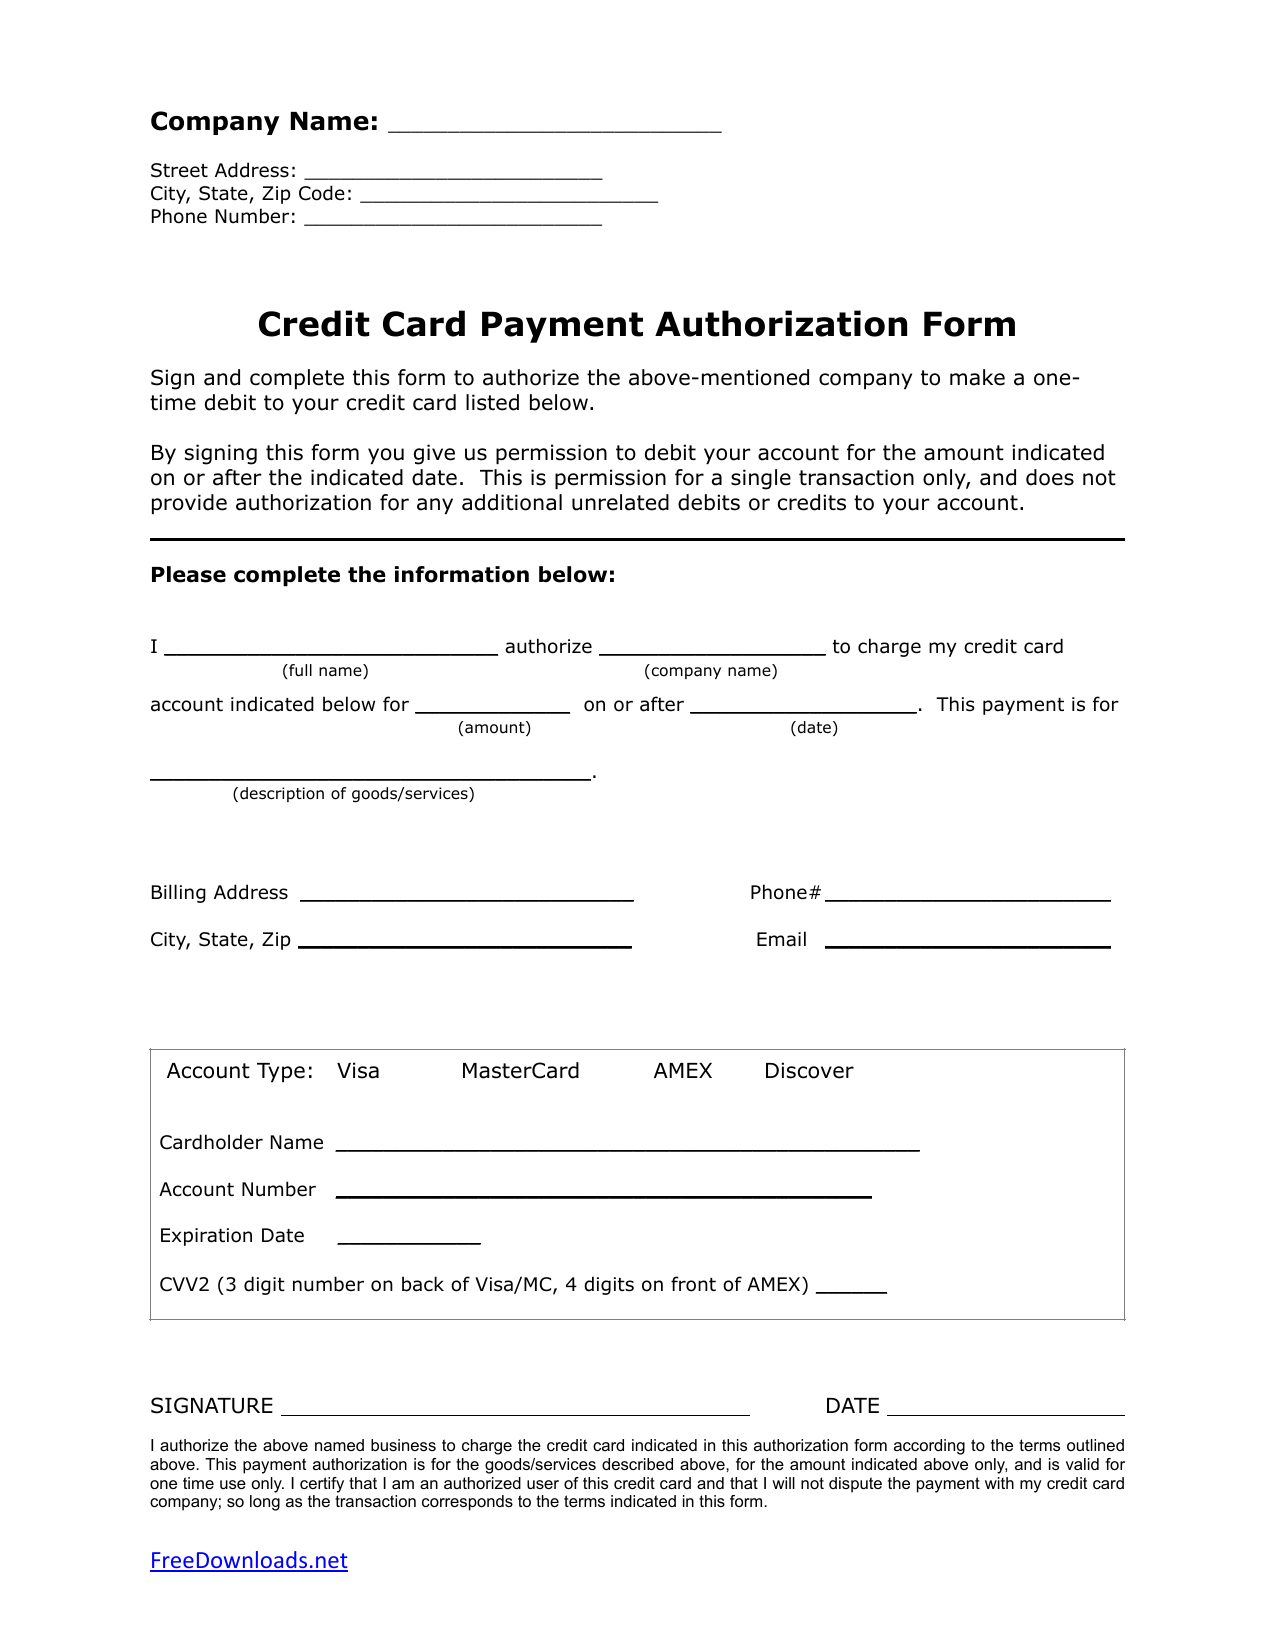 Download One (1) Time Credit Card Authorization Payment Form For Credit Card Authorization Form Template Word